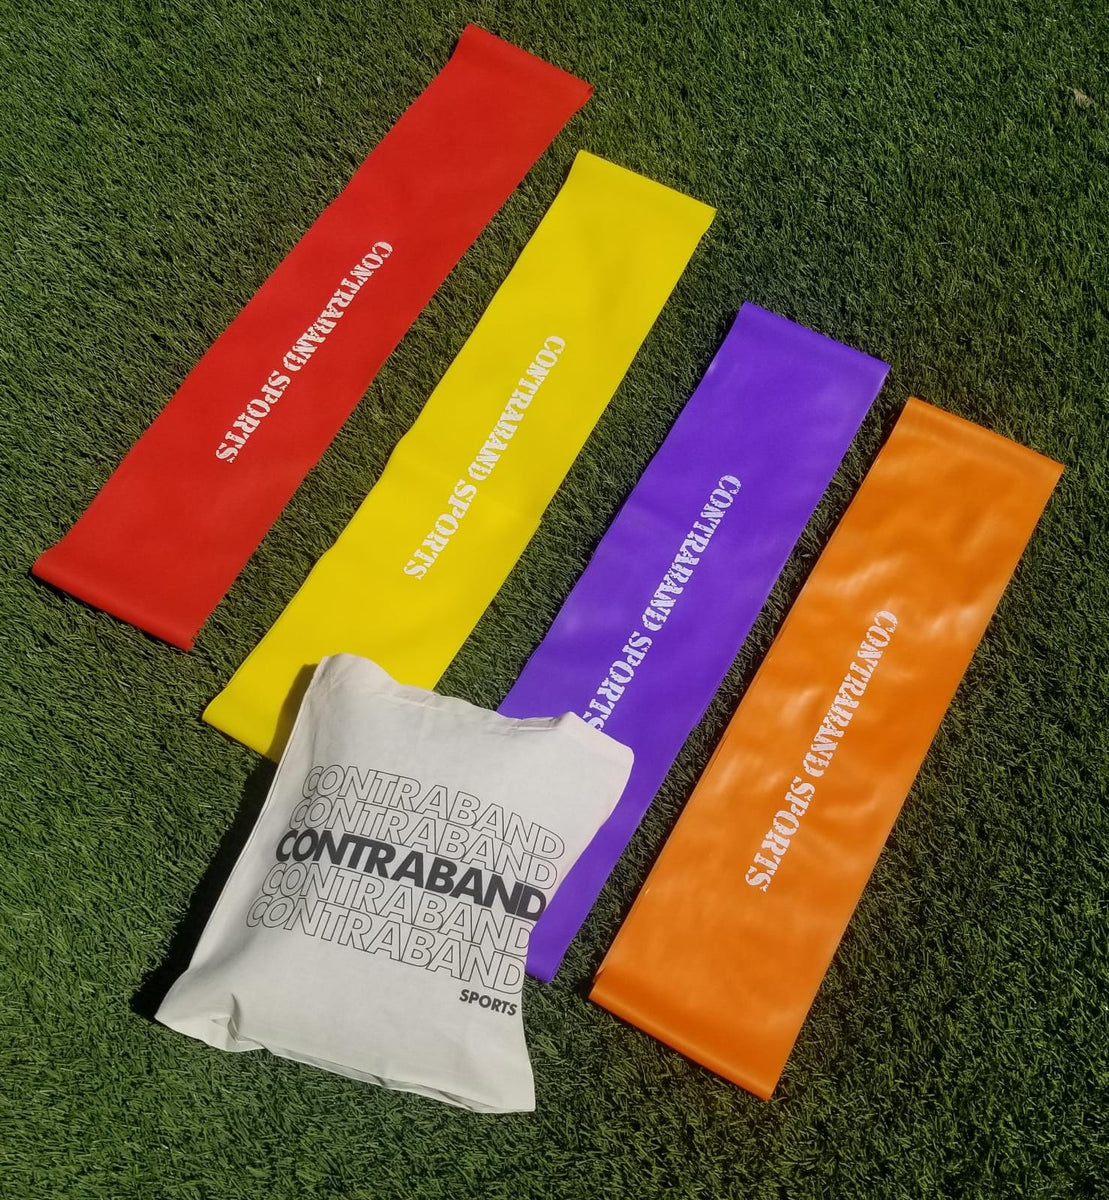 Contraband Sports 7509 Strength Training Resistance Therapy Bands